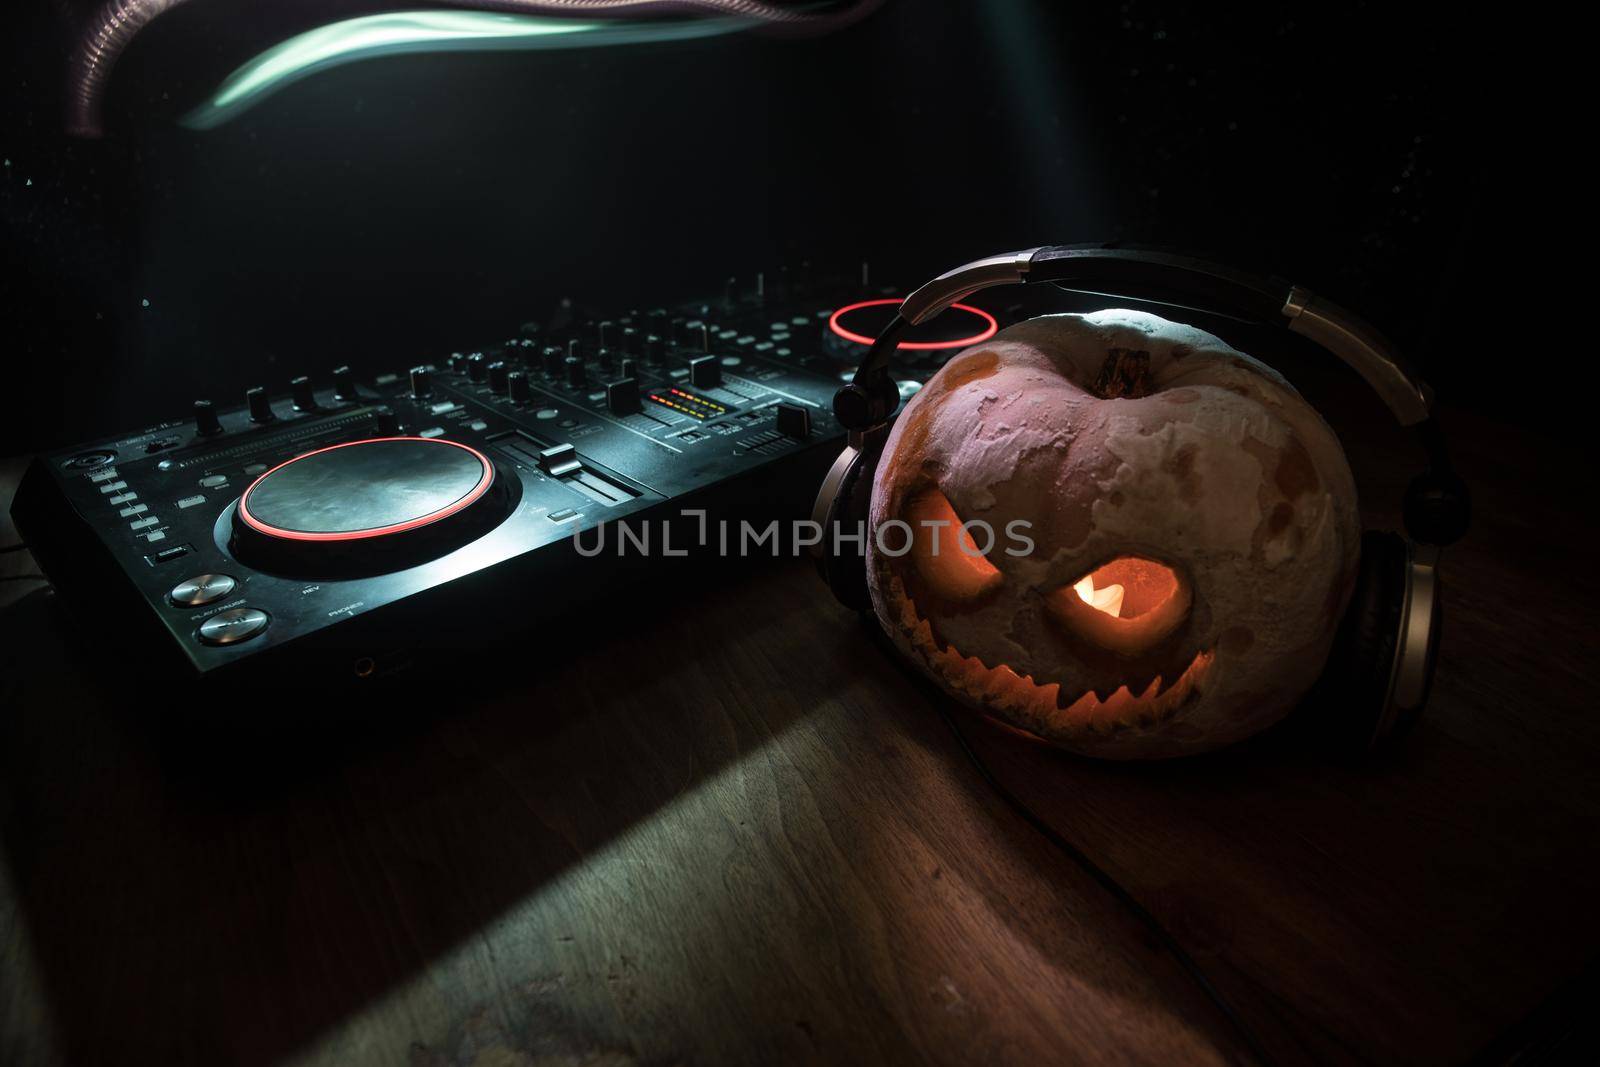 Halloween pumpkin on a dj table with headphones on dark background with copy space. Happy Halloween festival decorations by Zeferli